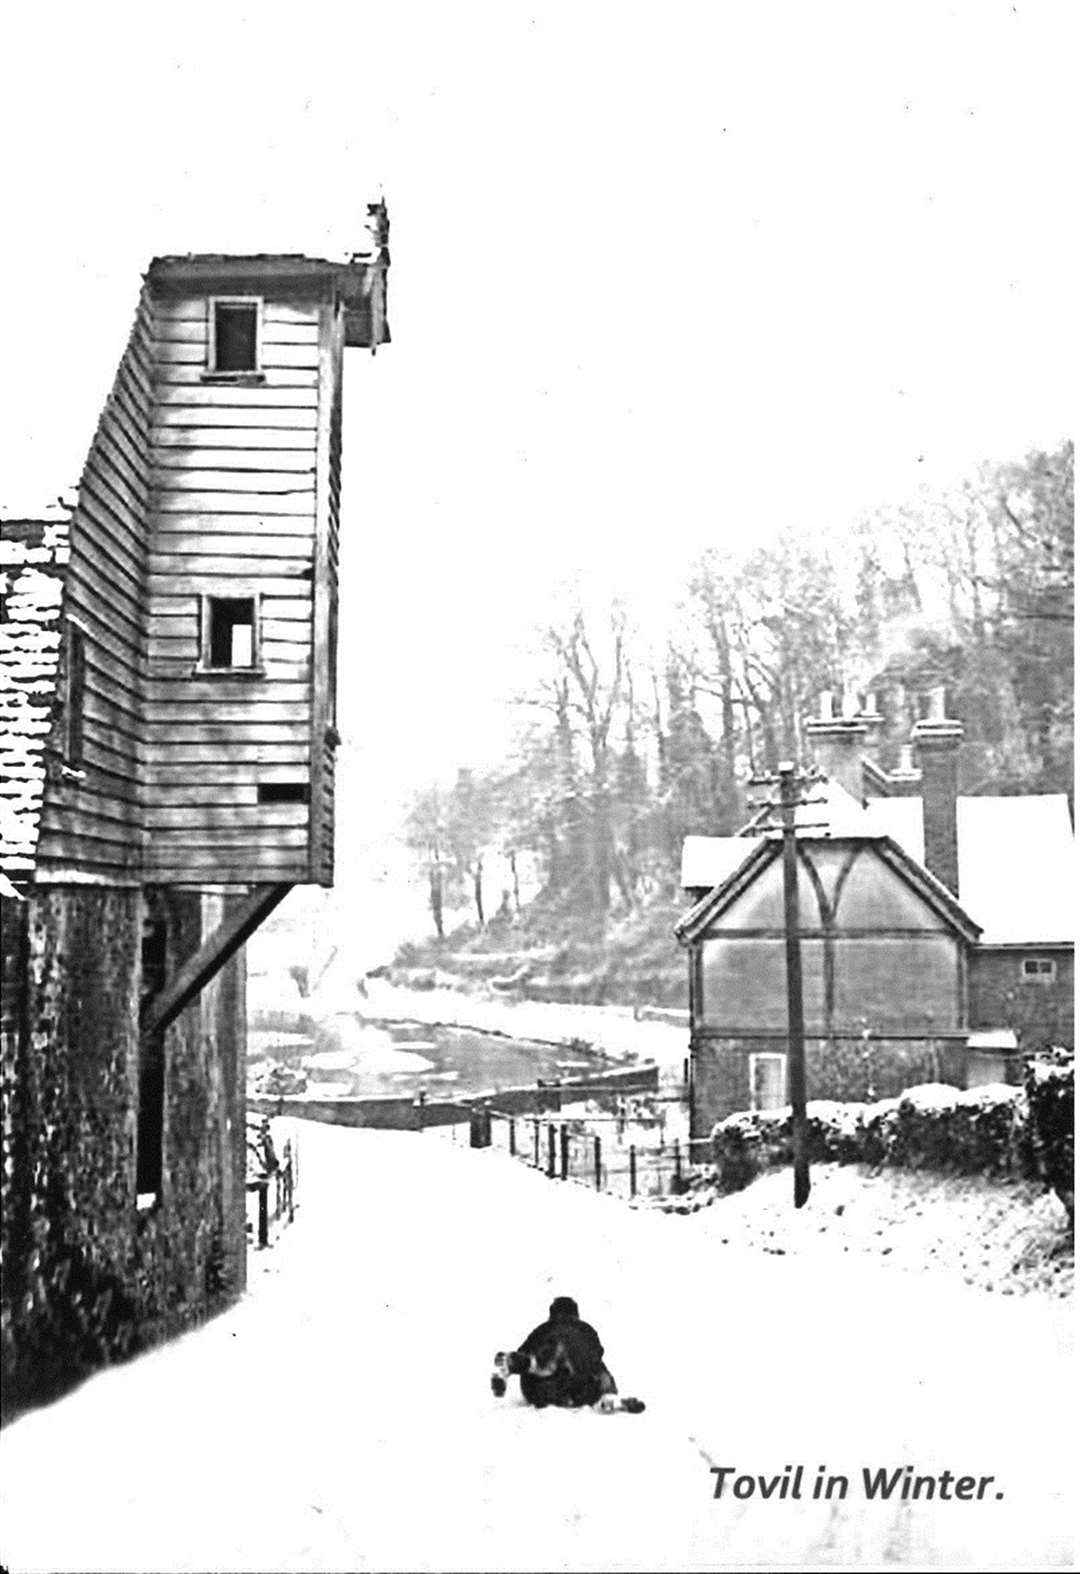 The overhang from Upper Crisbrook Mill in Cave Hill (in the snow)